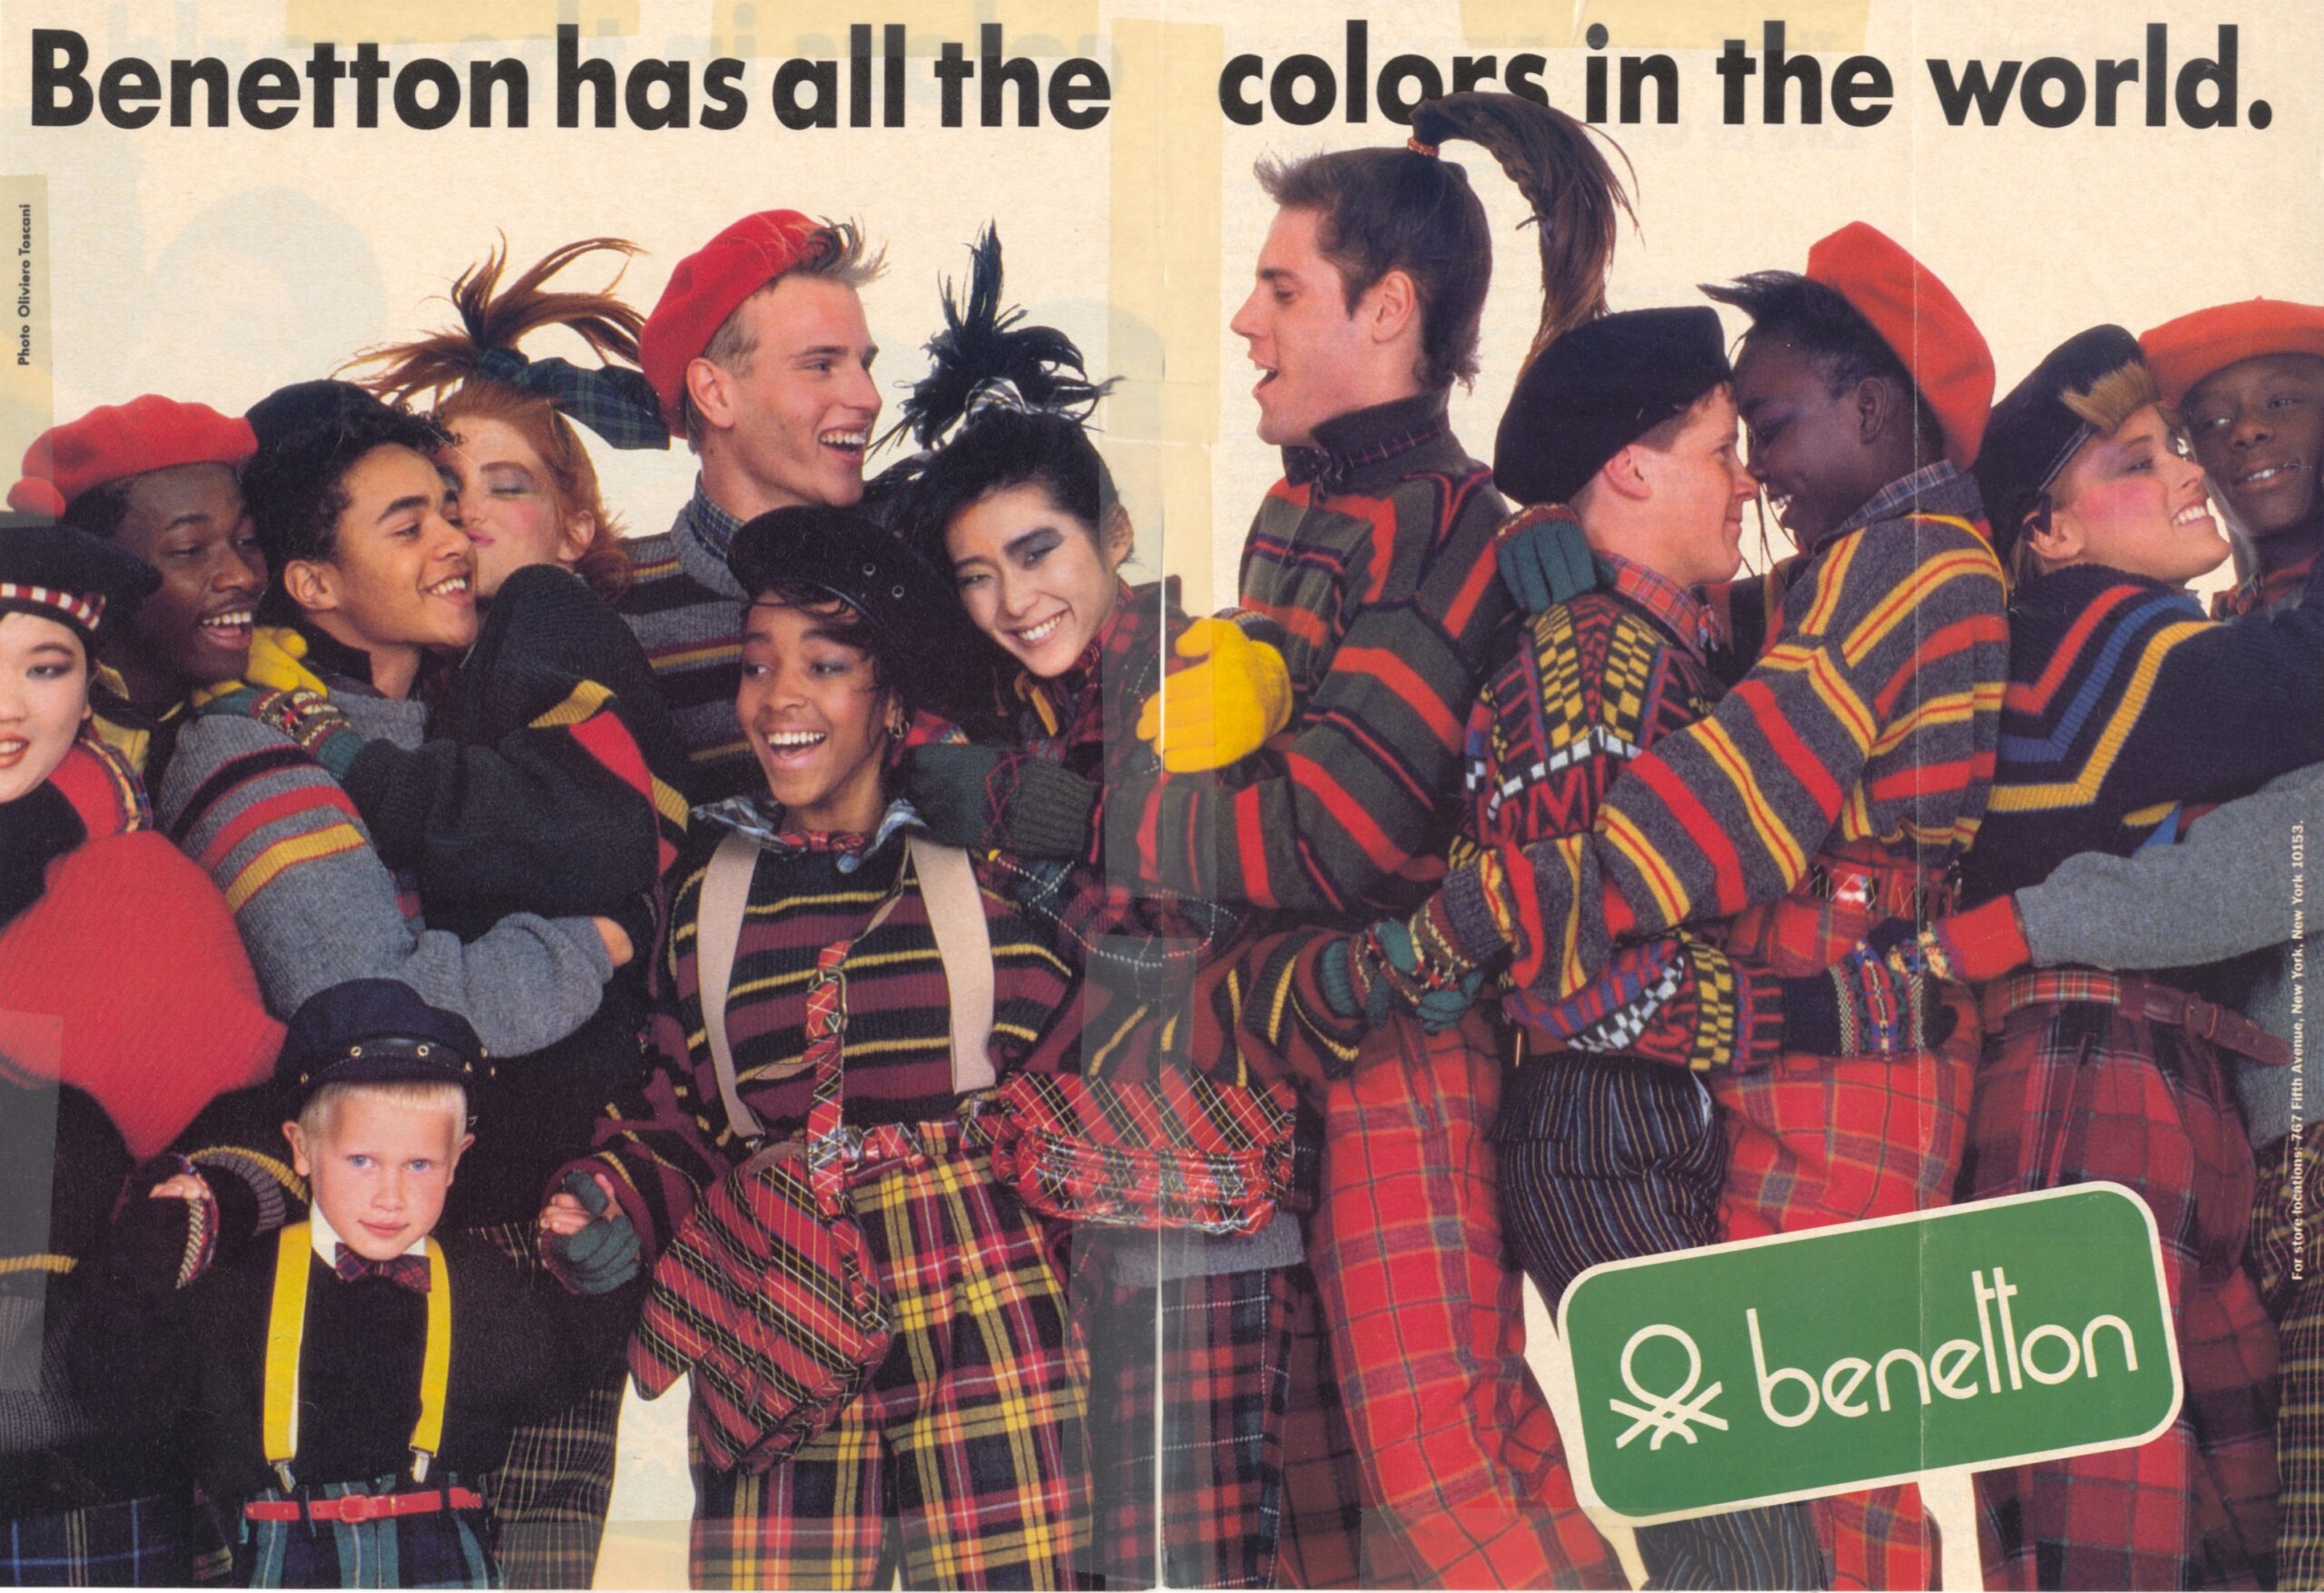 United Colors of Benetton global village ad